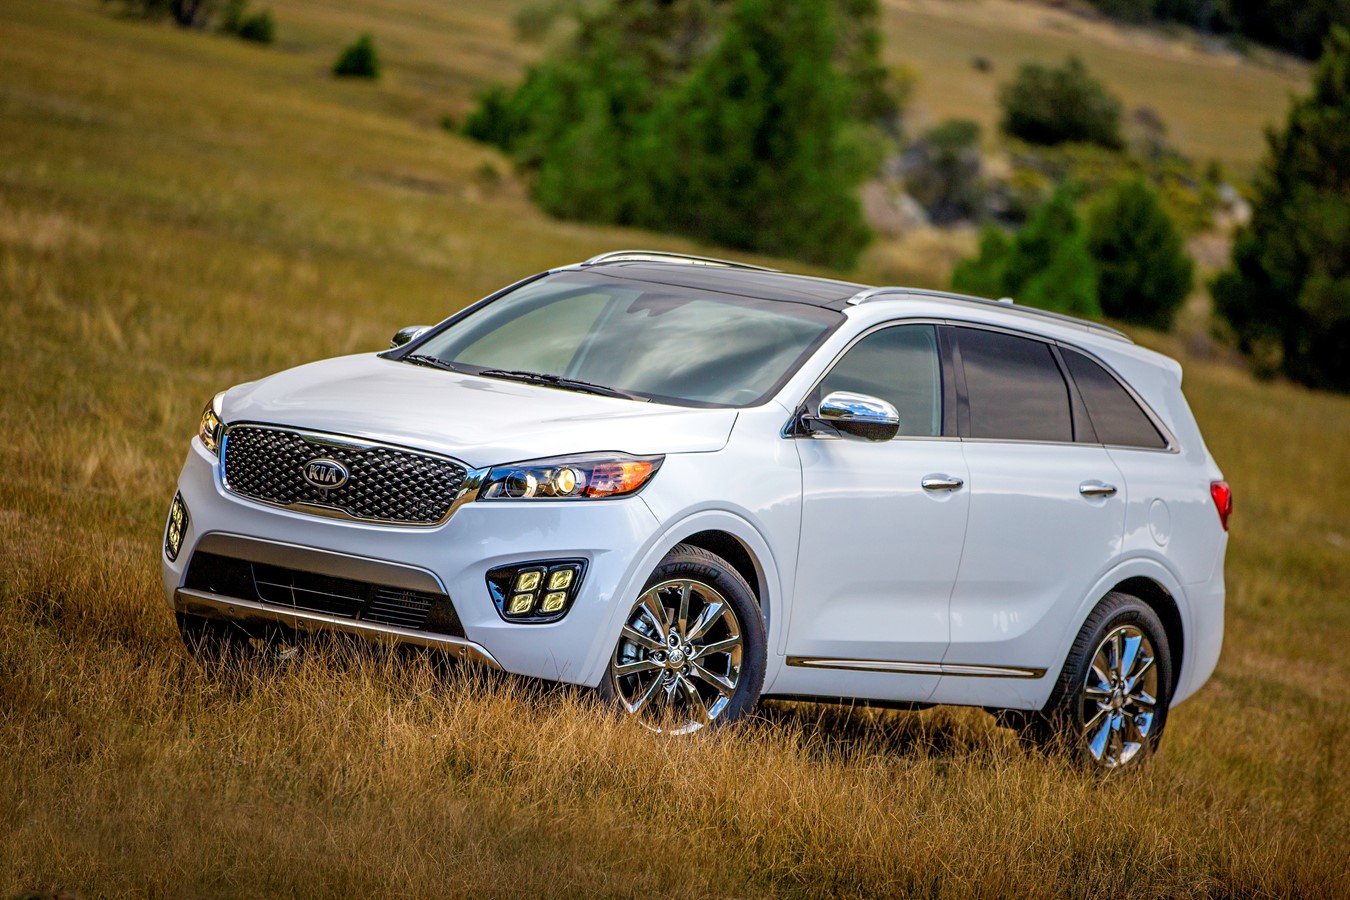 New 2016 Sorento to debut at Los Angeles Auto Show